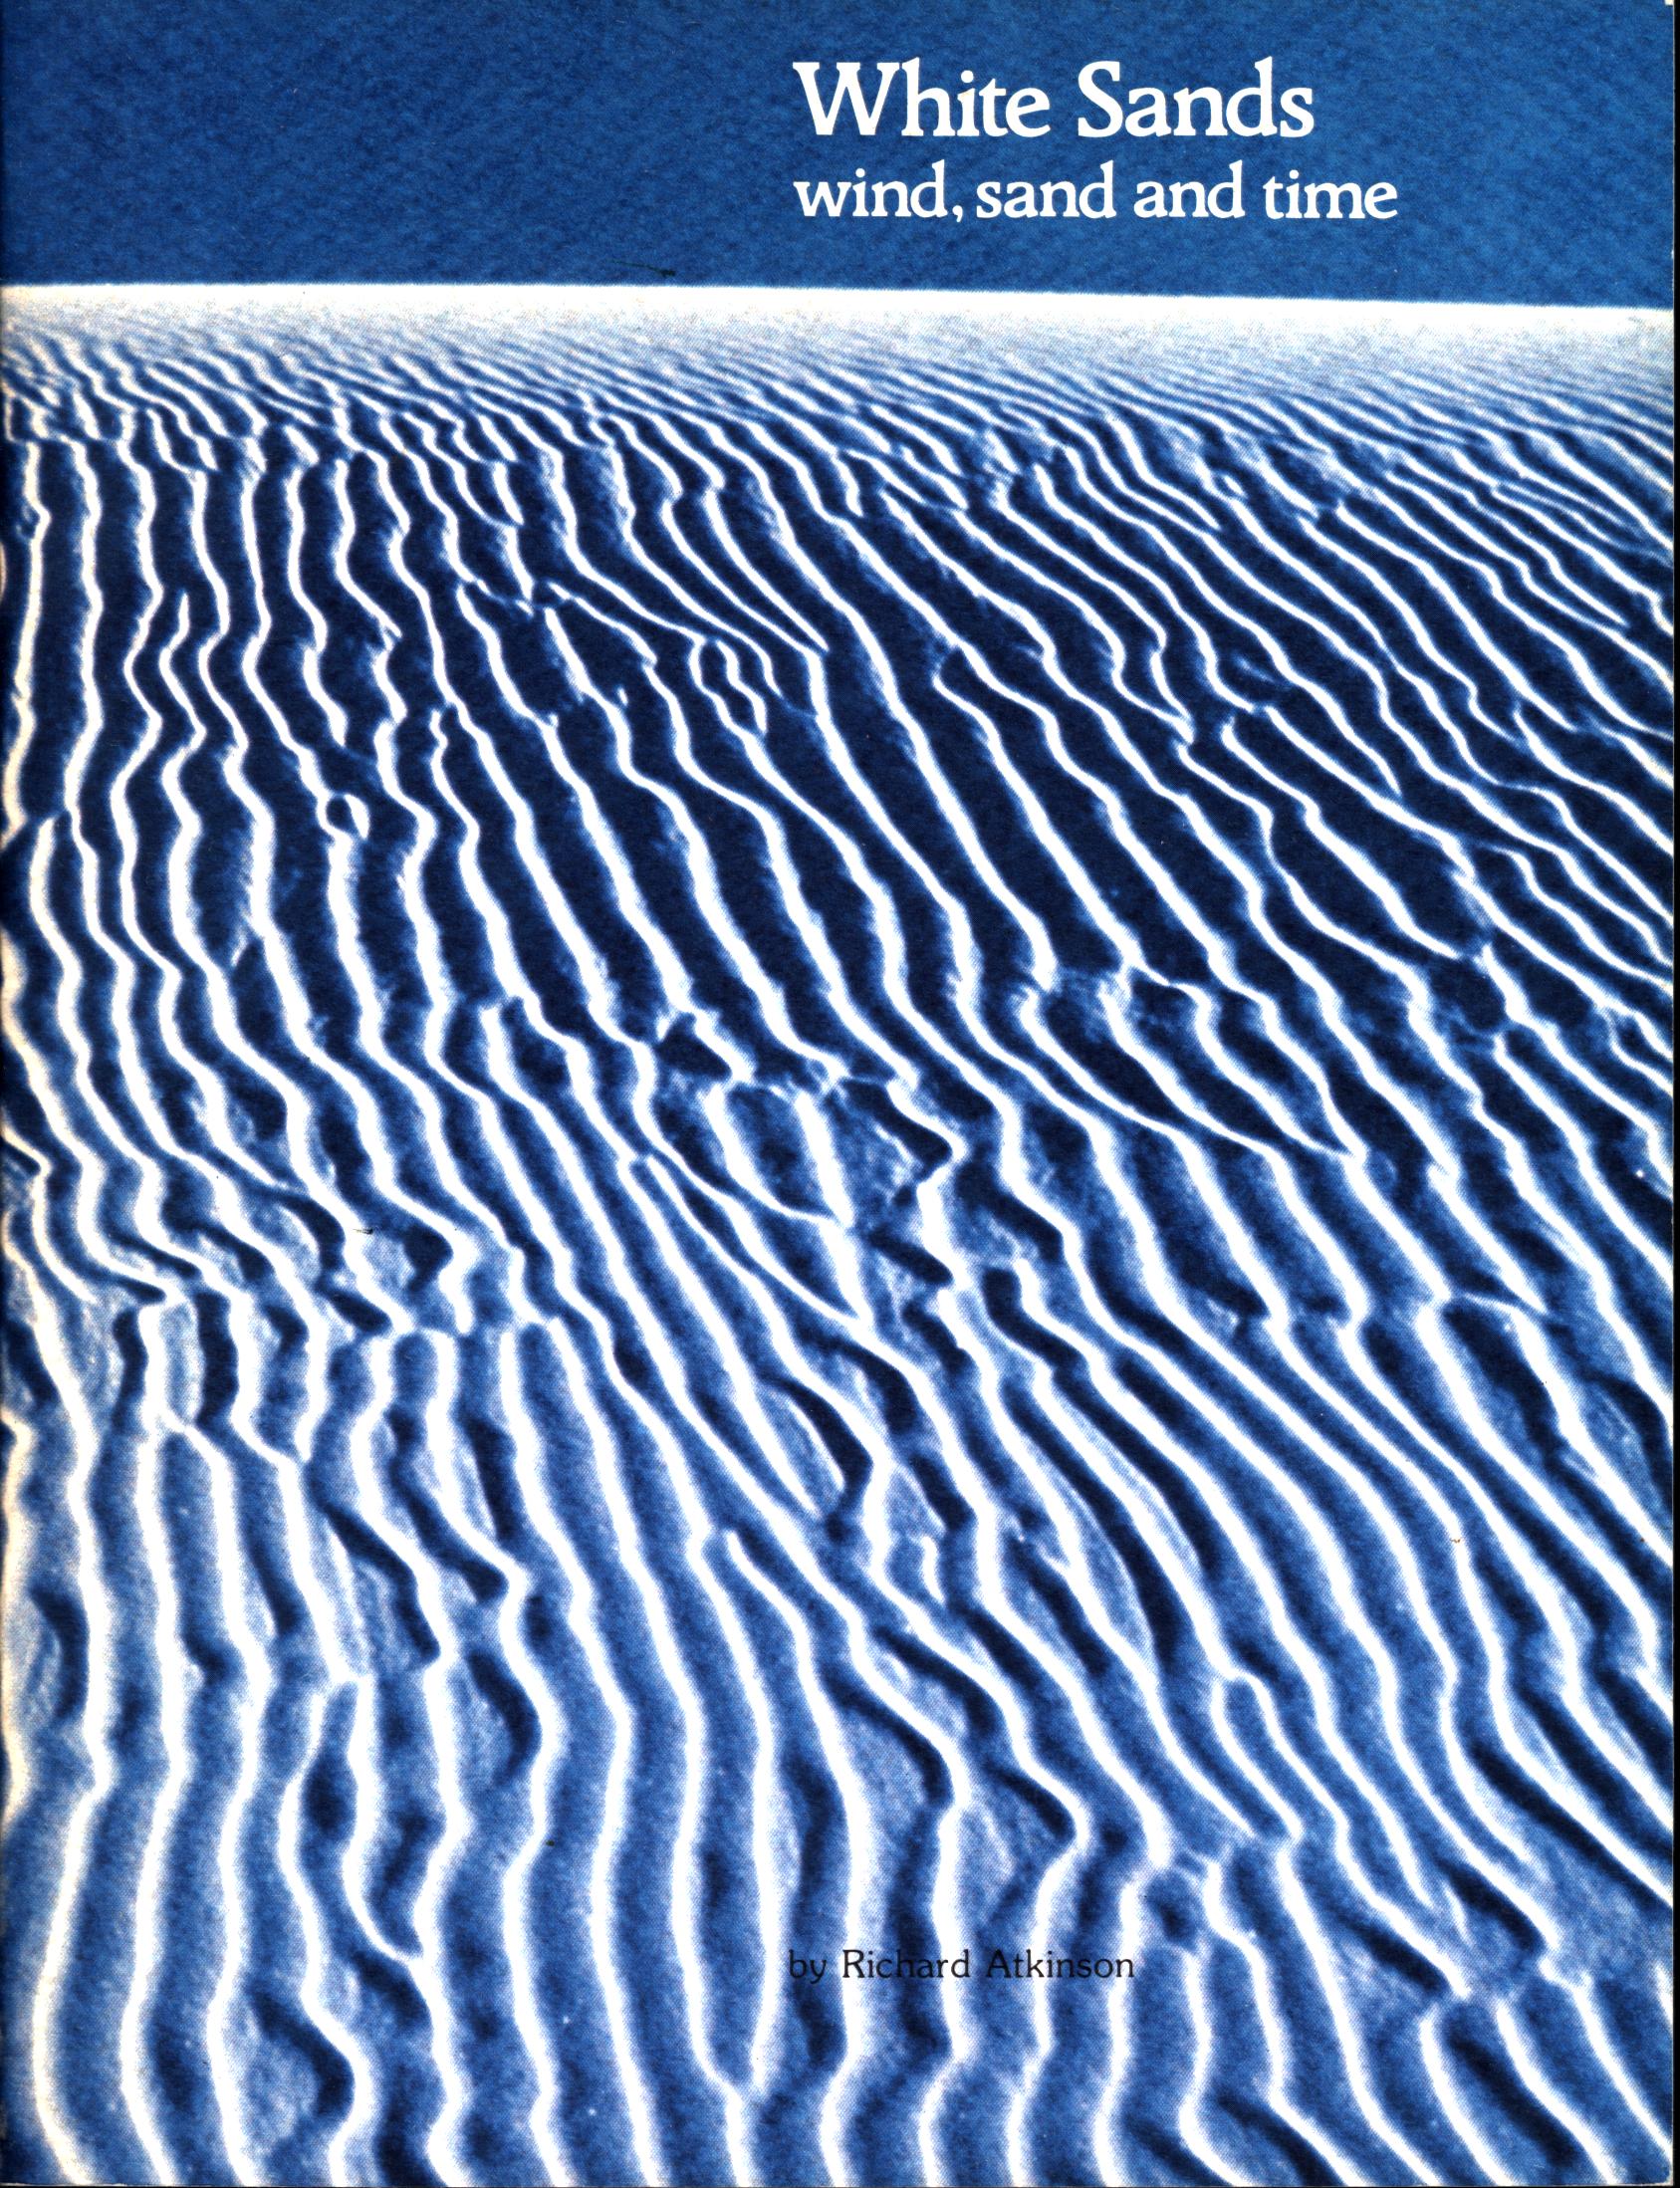 WHITE SANDS: wind, sand, and time. 